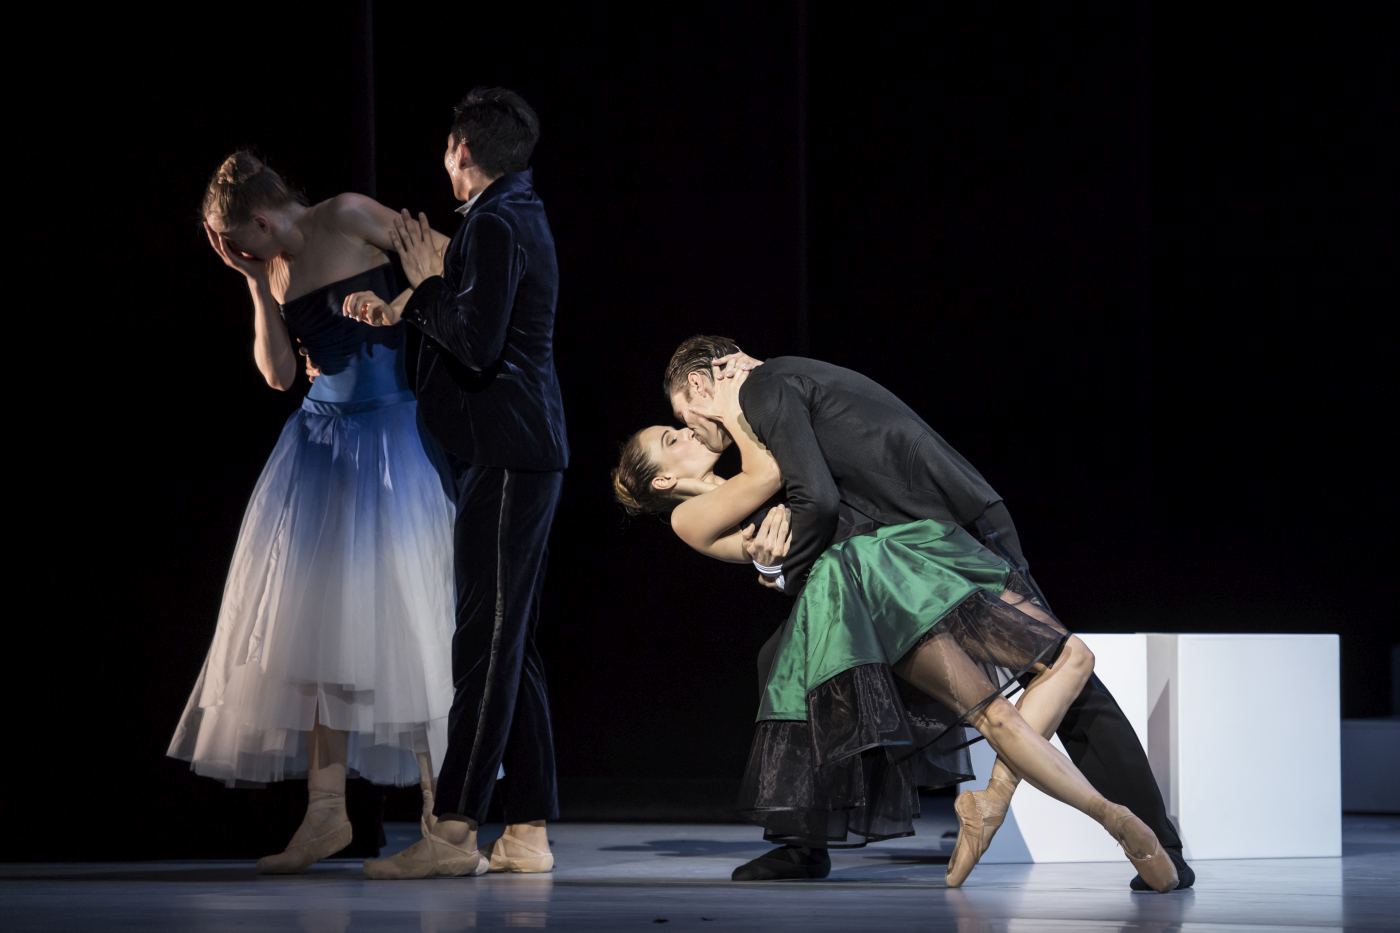 10. K.Schrader (Bianca), J.An (Lucentio), A.Tognoloni (Katherine), and F.Mariottini (Petruchio), “The Taming of the Shrew” by J.-C.Maillot, Les Ballets de Monte Carlo 2022 © A.Blangero